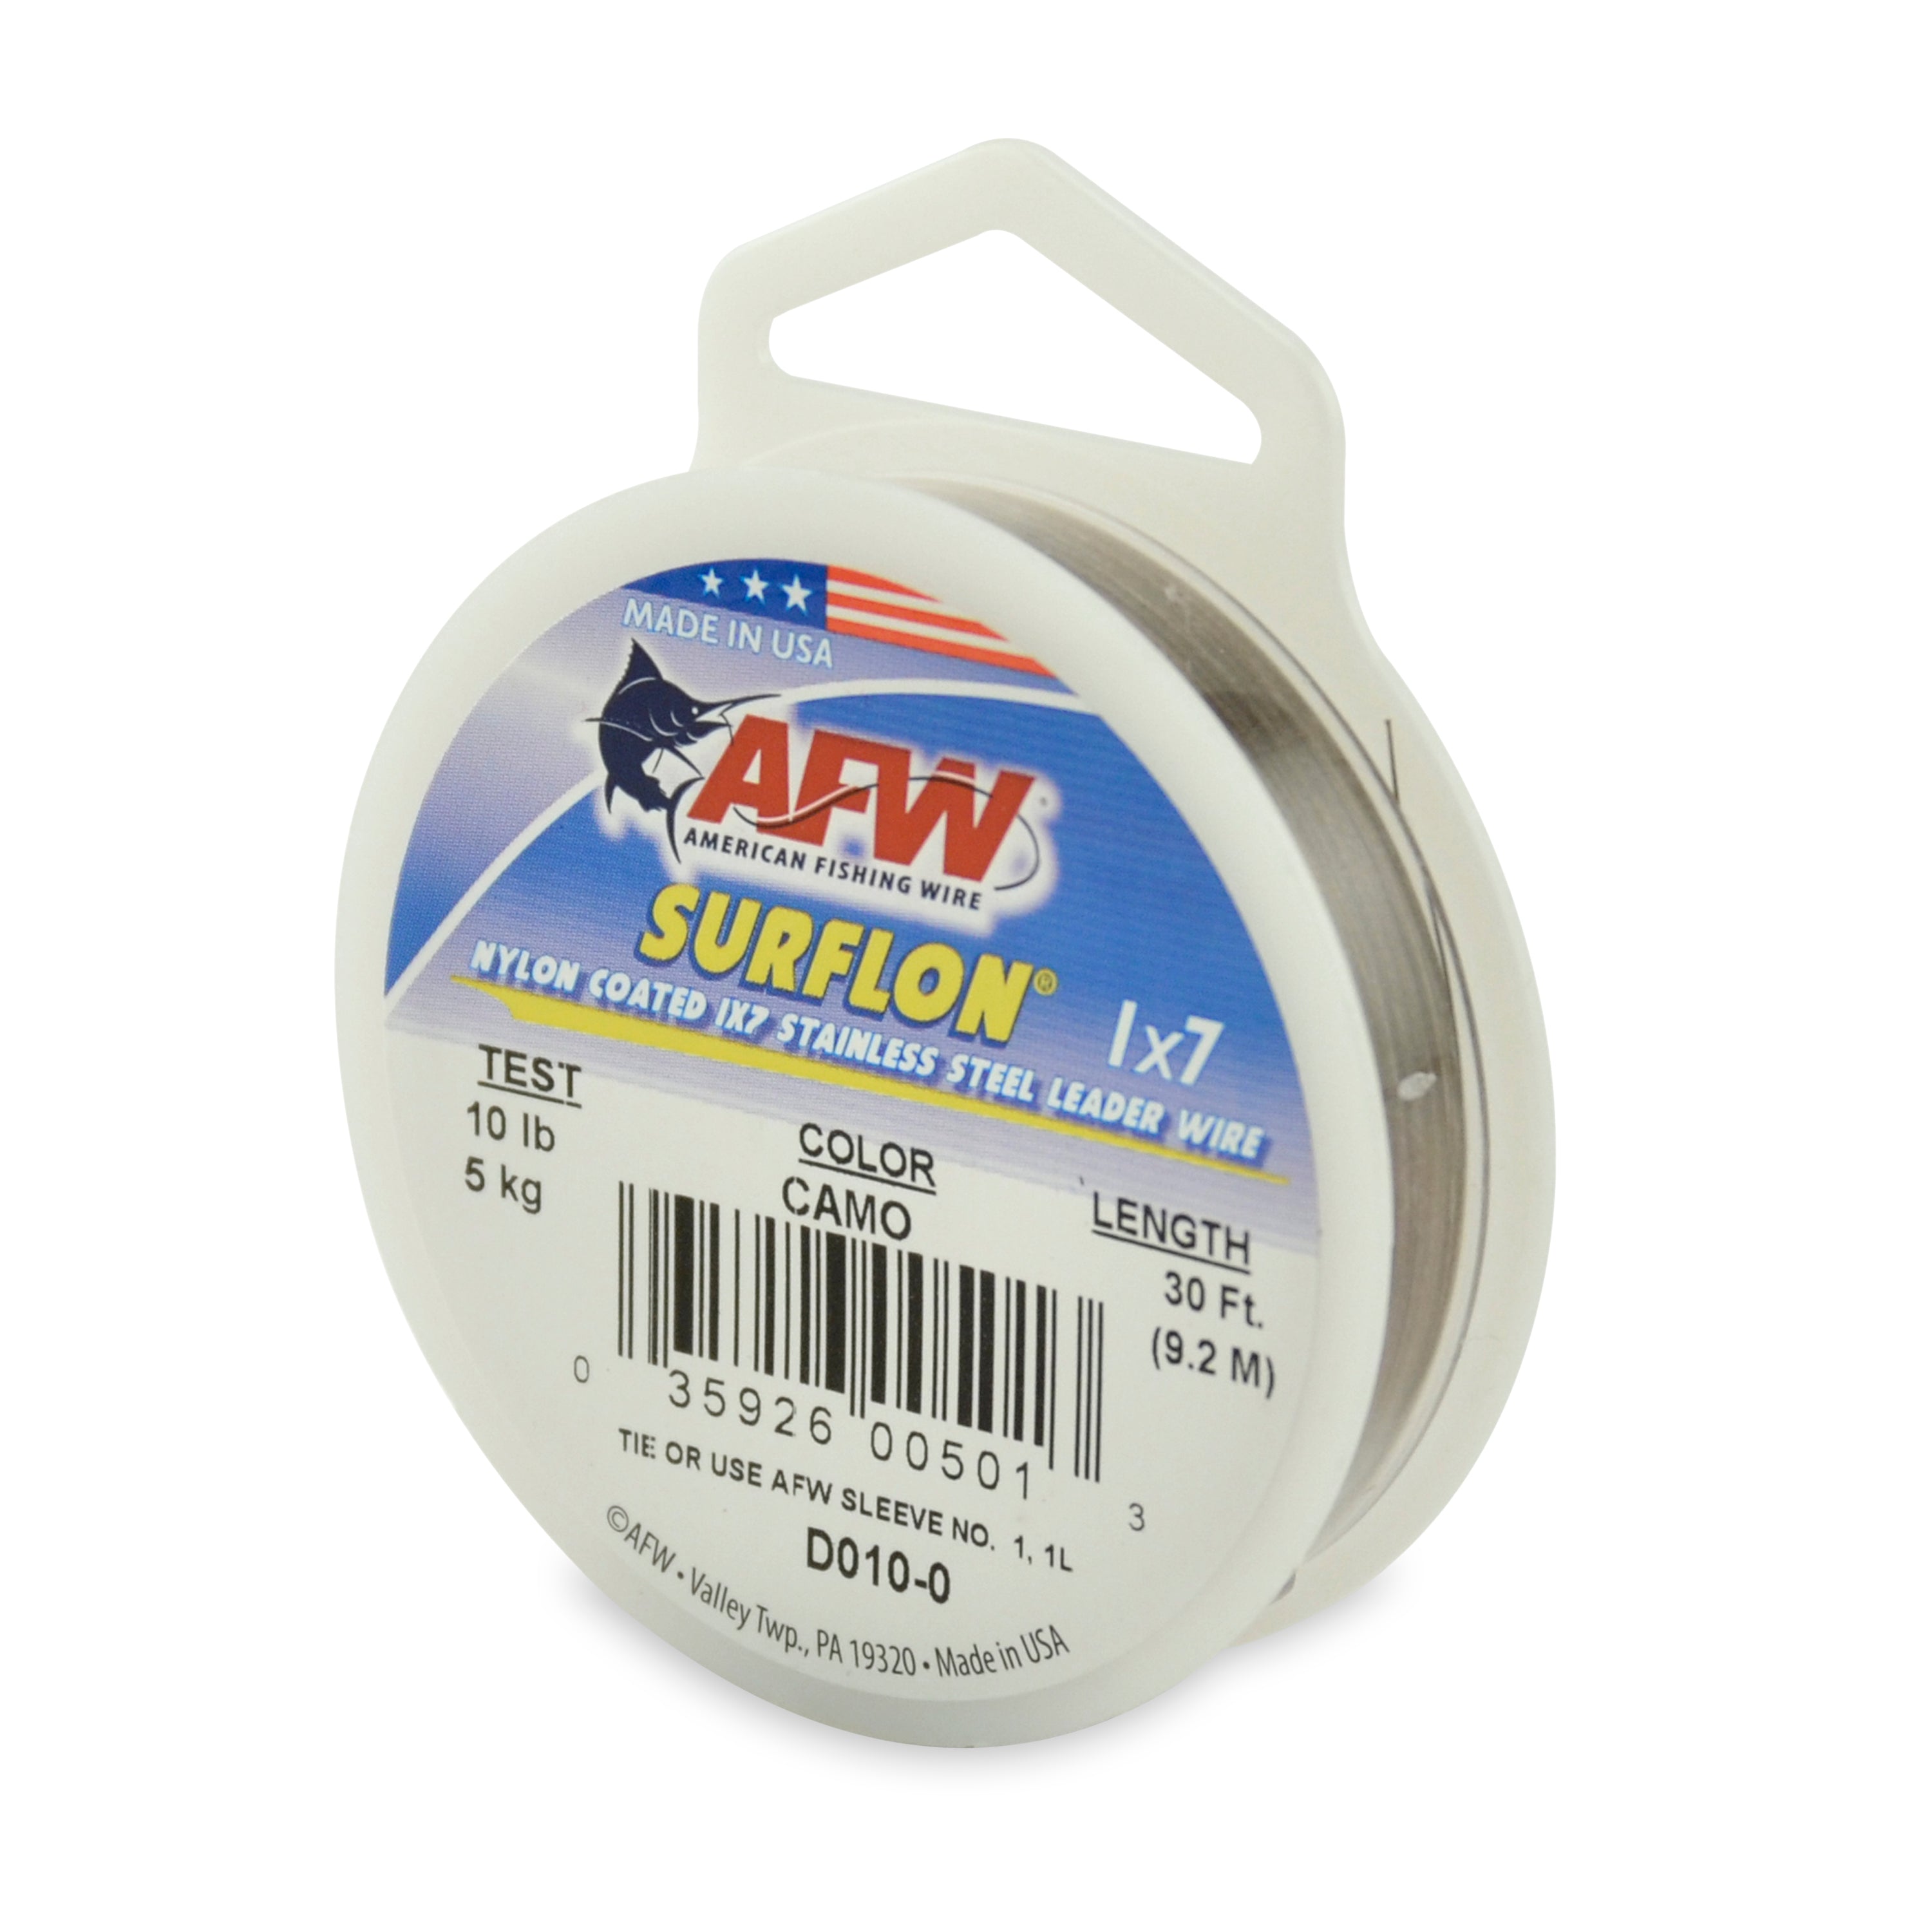 American Fishing Wire Surflon Nylon Coated 1X7 Stainless Steel